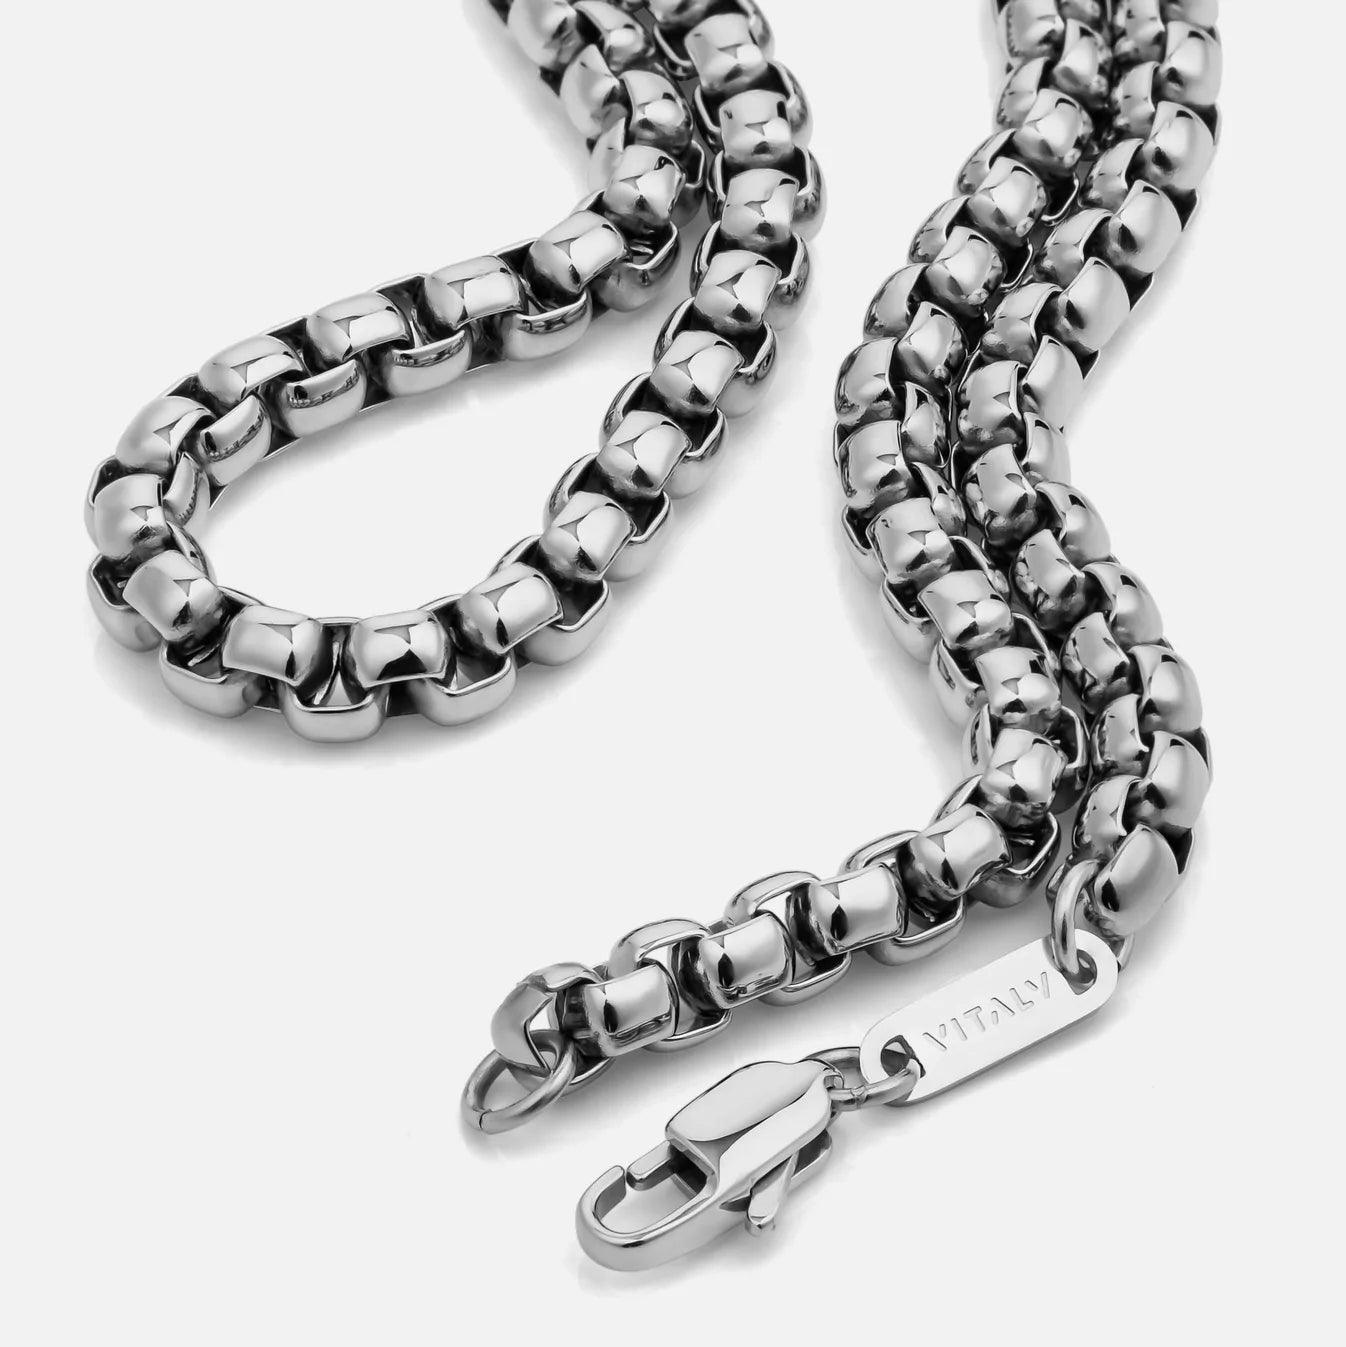 VITALY Margin Stainless Steel Necklace - SUPERCONSCIOUS BERLIN